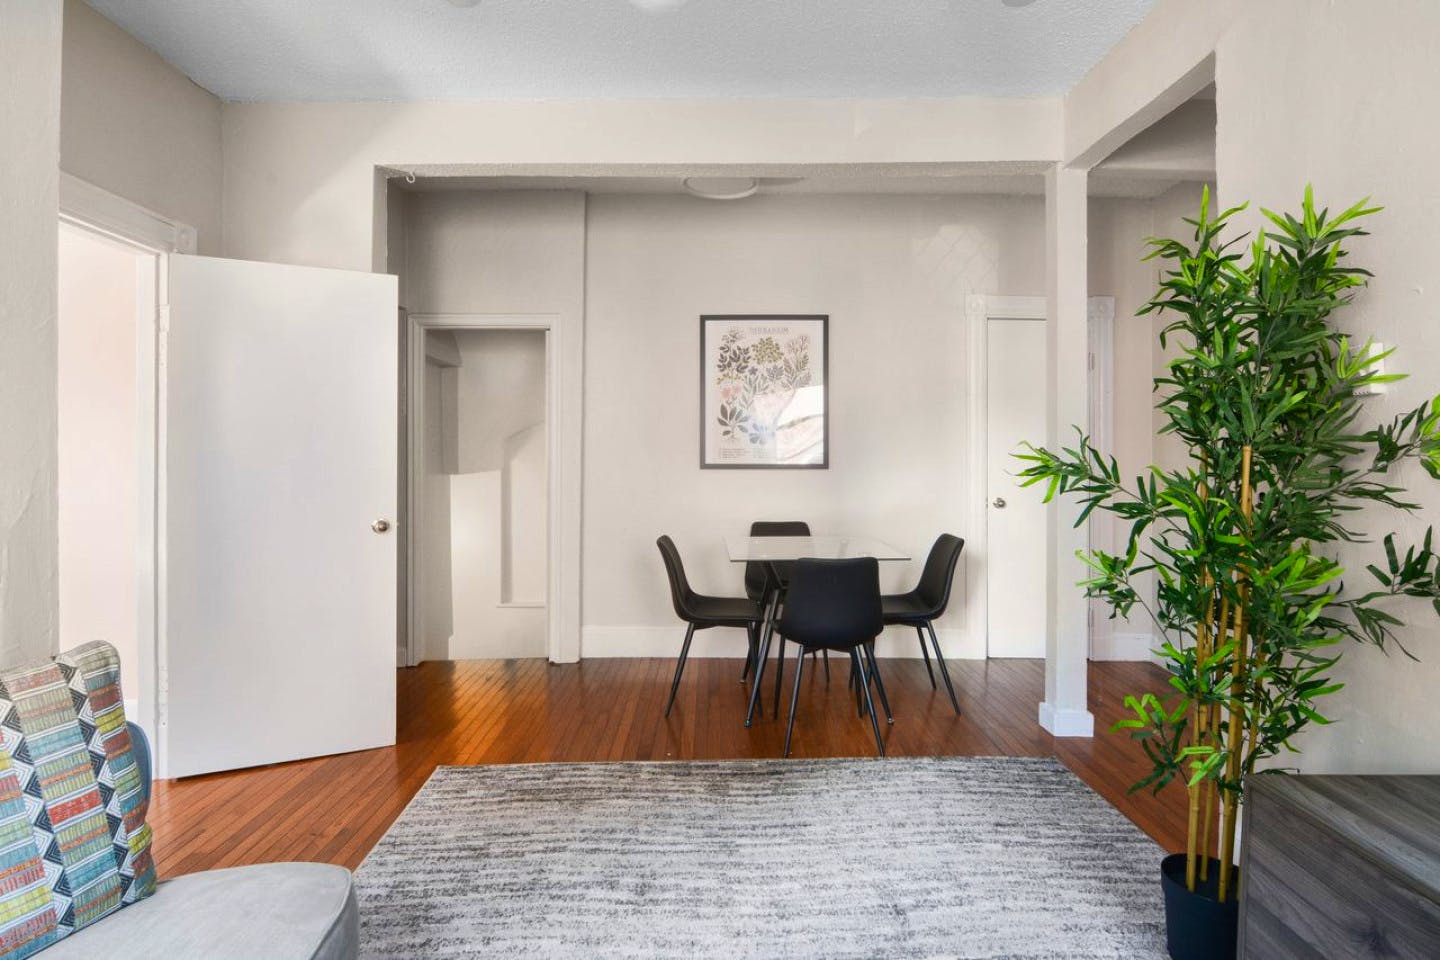 Ideally Upscale Apt. 1 mile from Olmsted Park